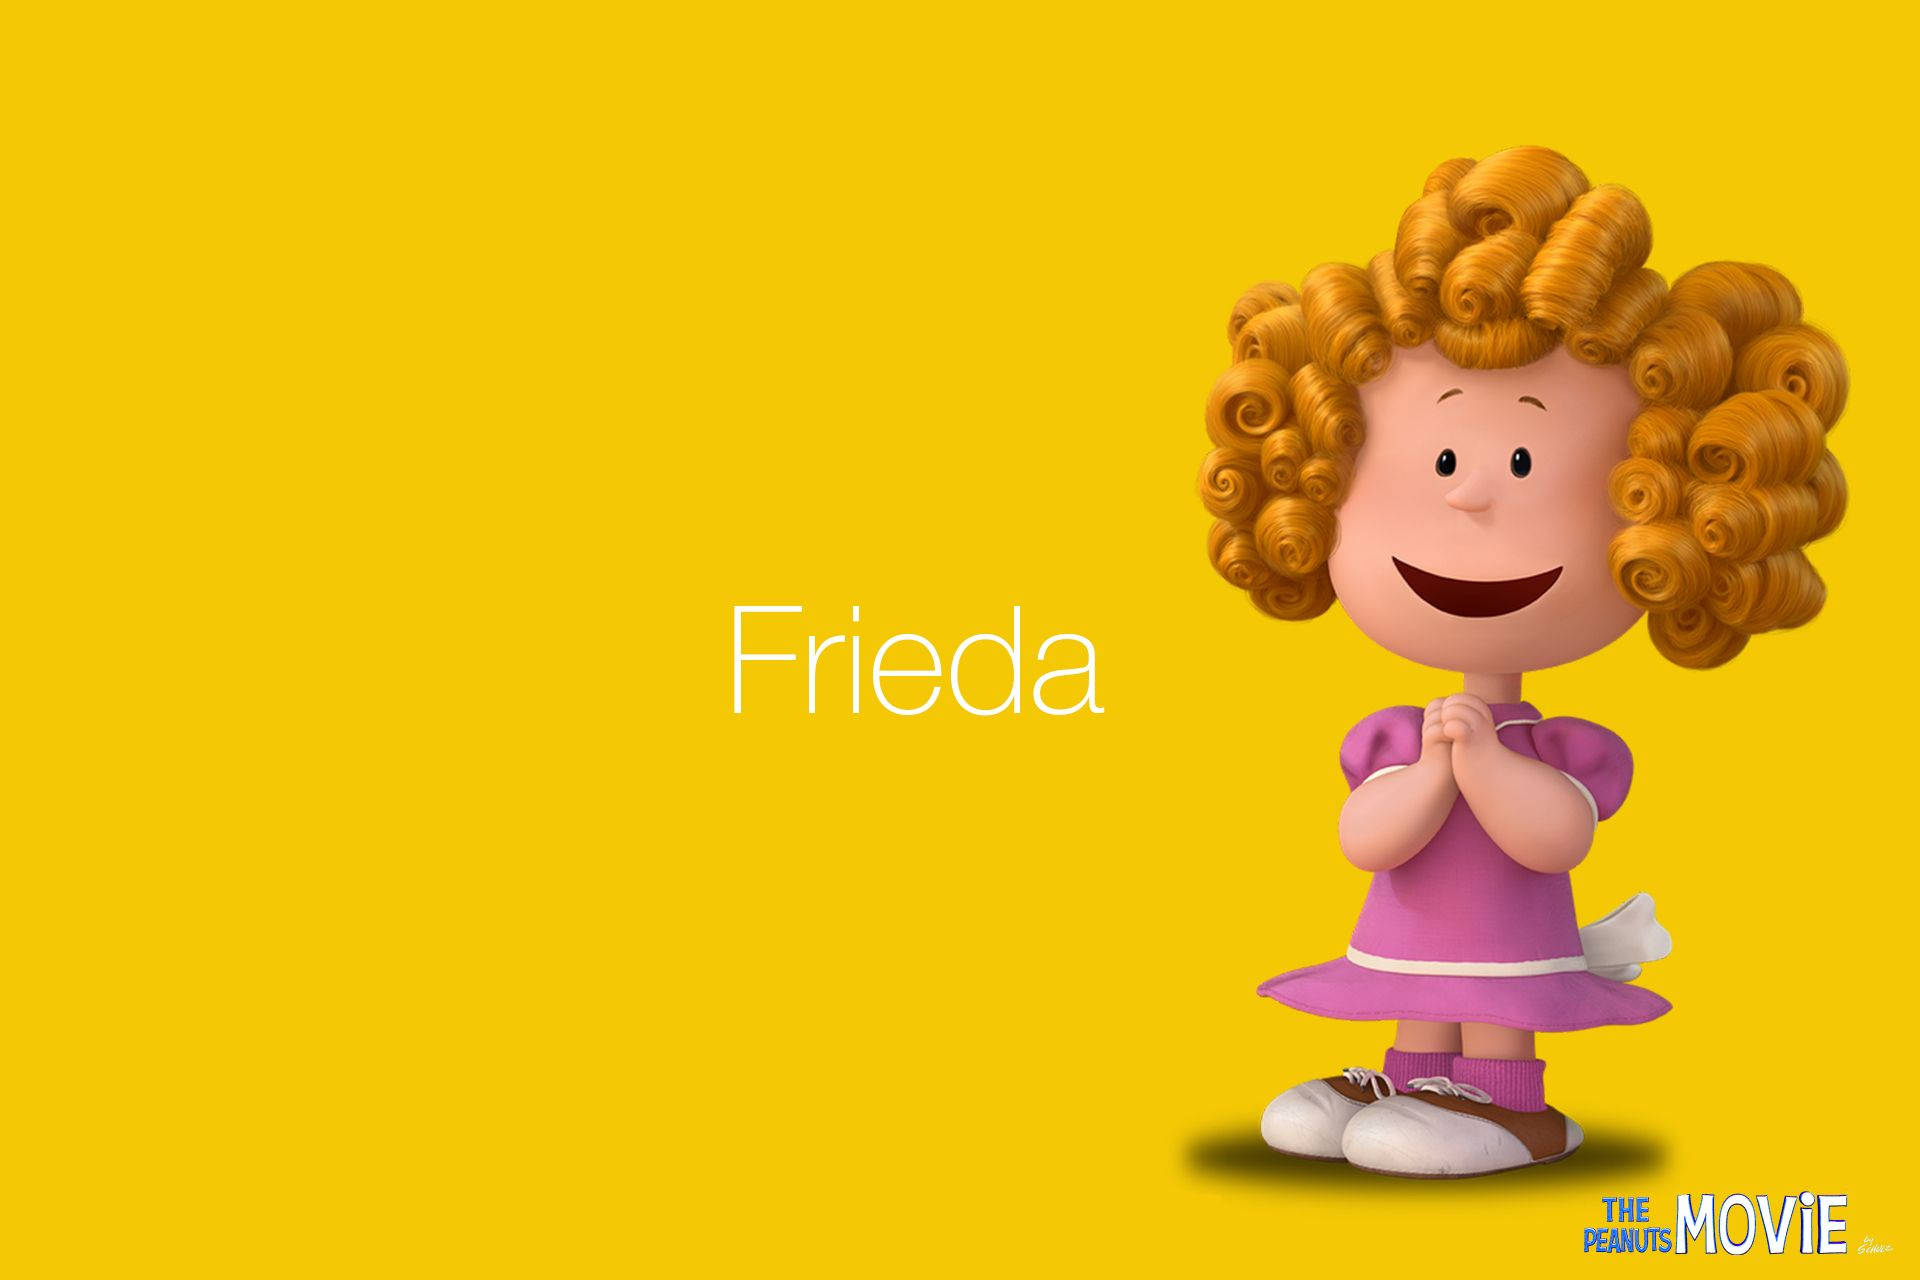 Frieda From The Peanuts Movie Smiling Energetically